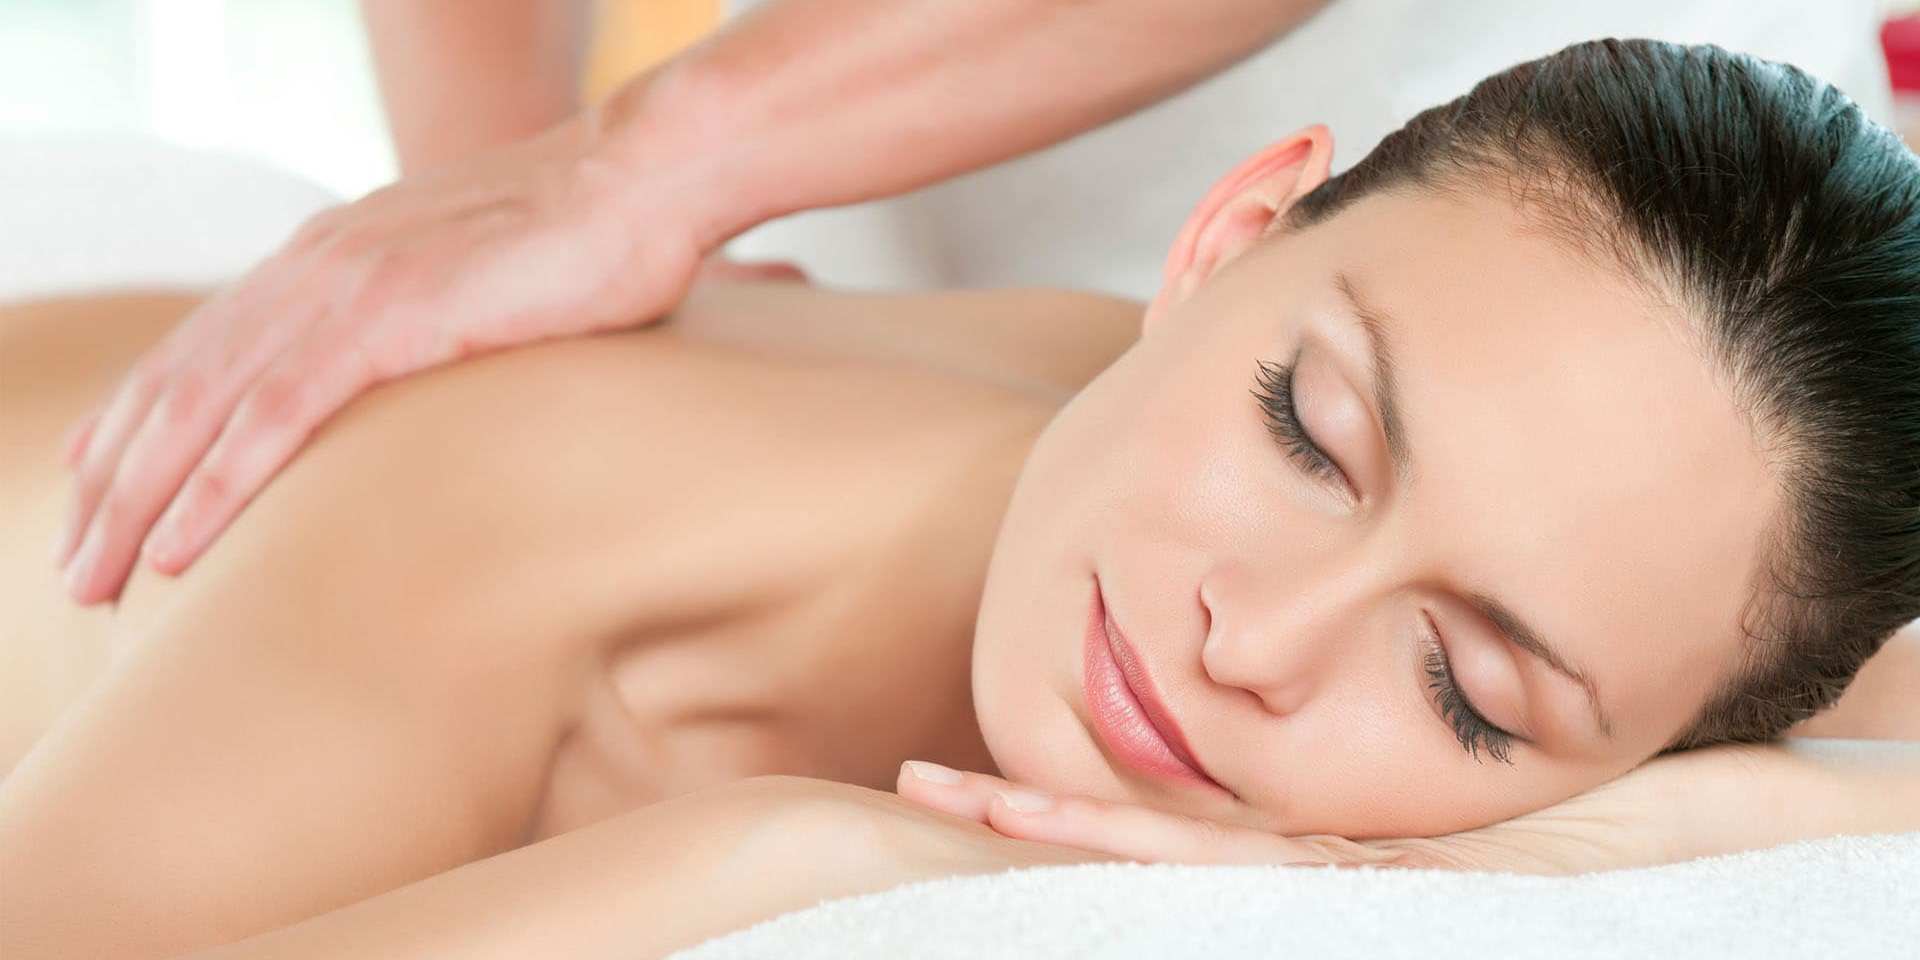 The Differences between Relaxation and Therapeutic Massages